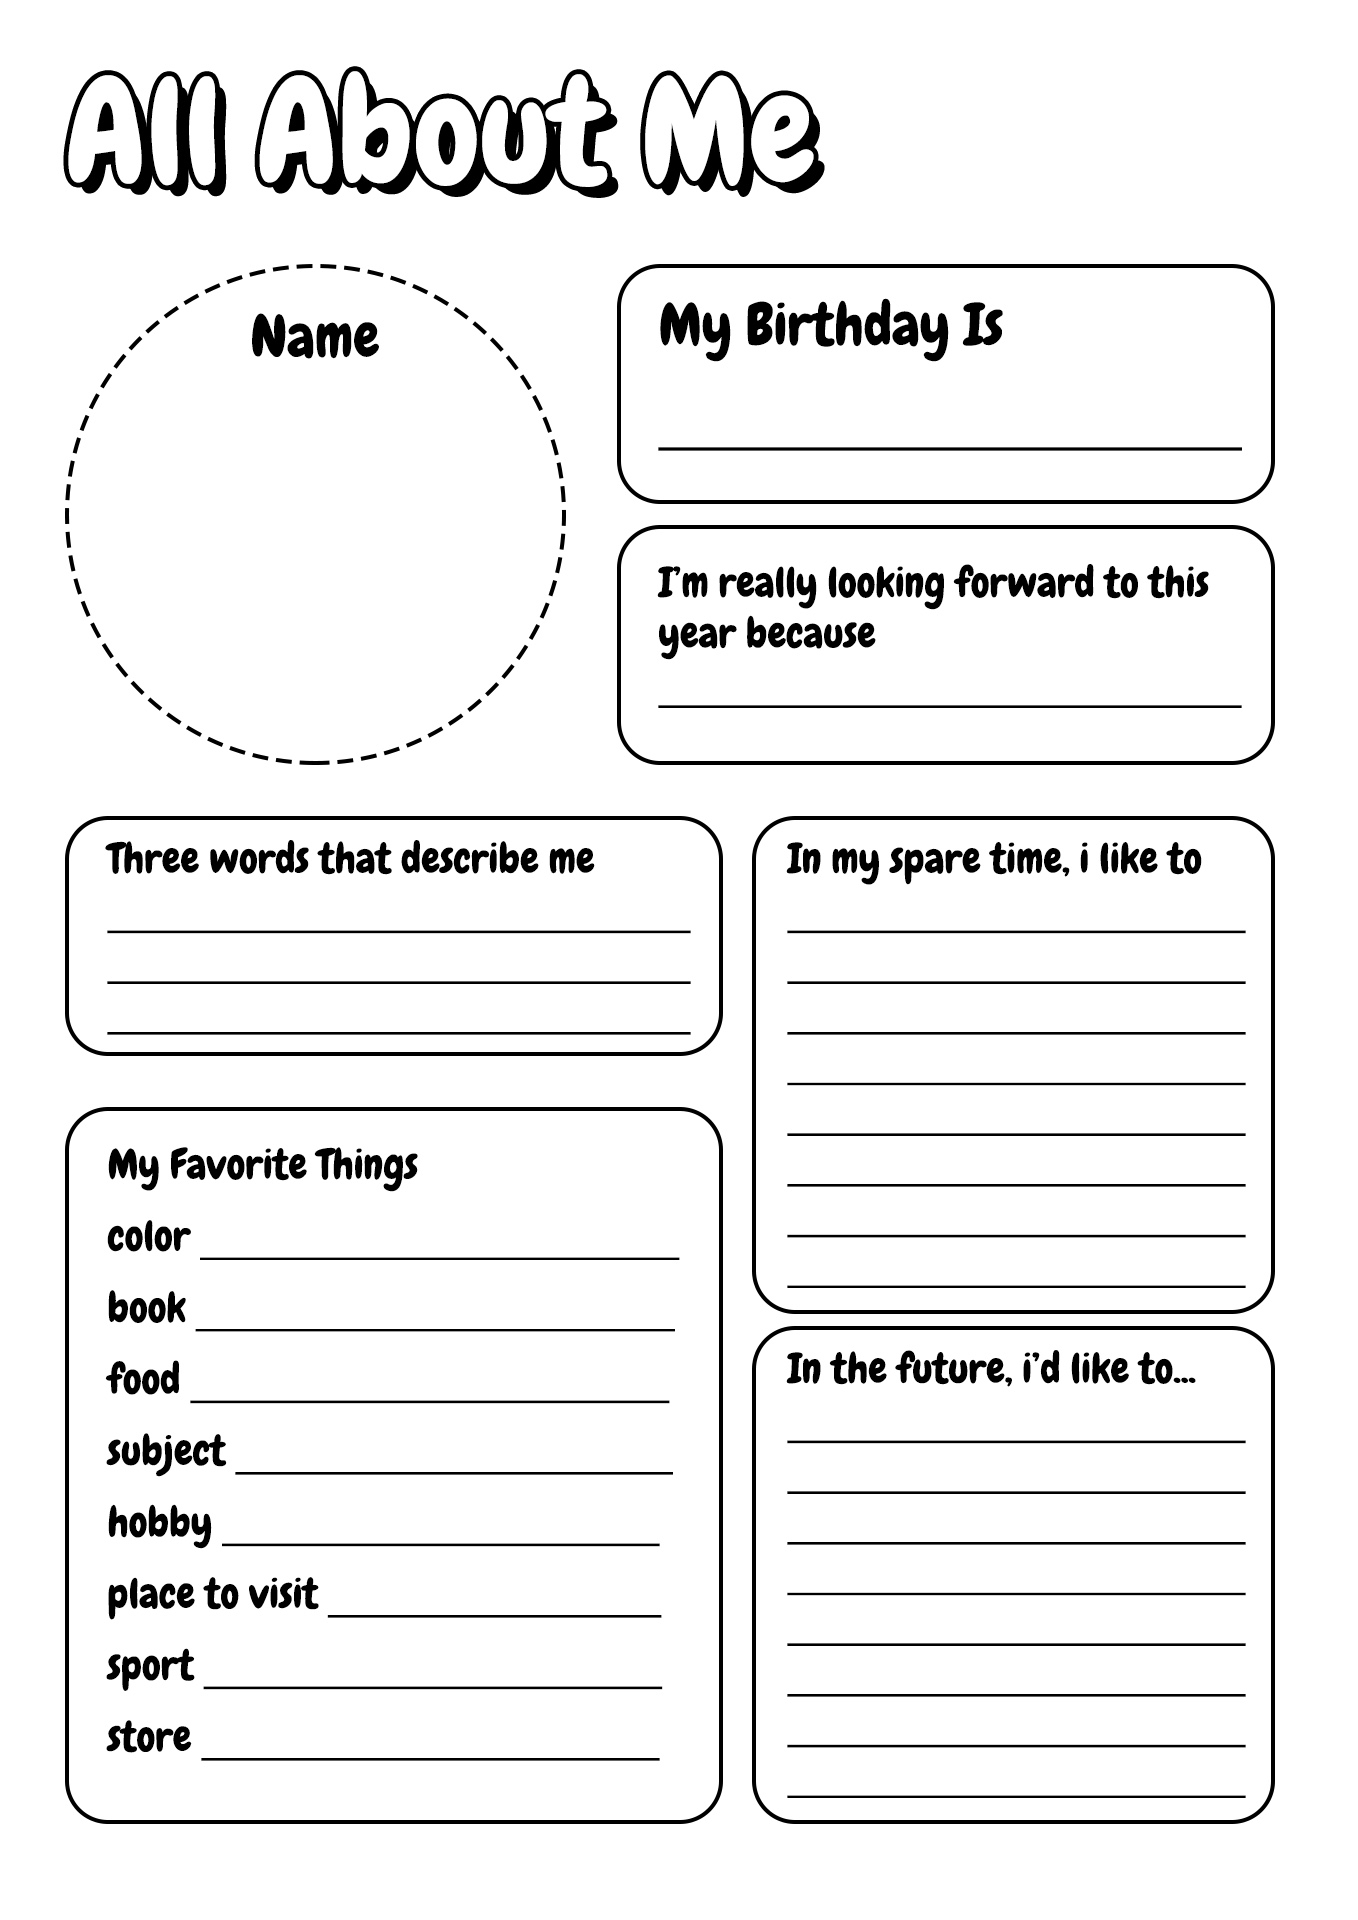 All About Me Printable Elementary Worksheets Free Image